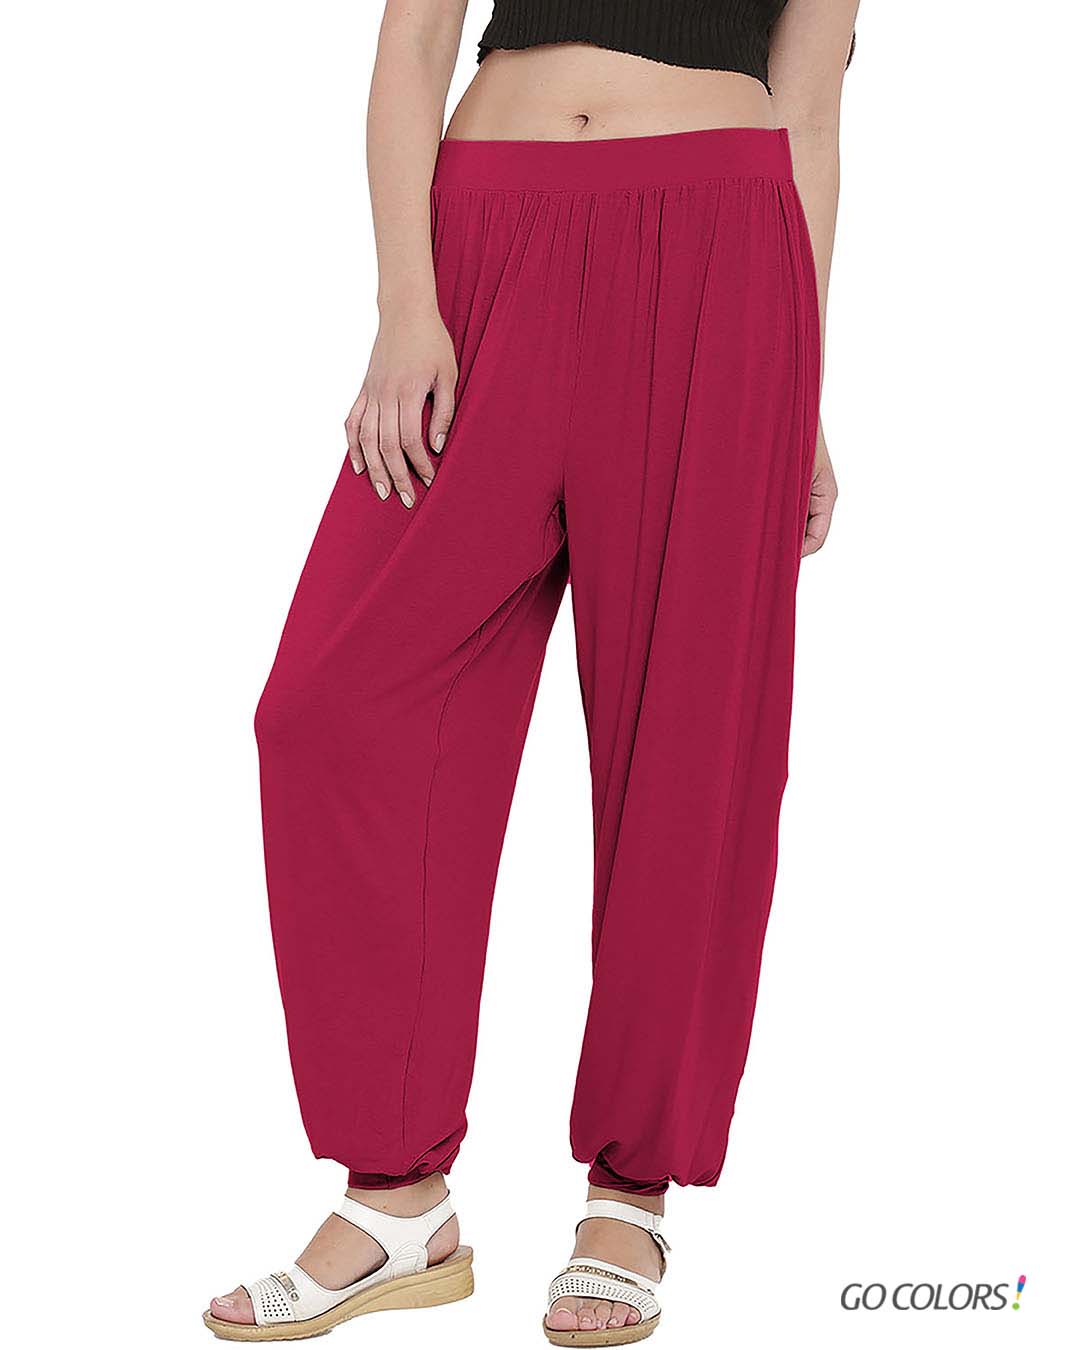 Top Go Colors Track Pant Retailers in Chandigarh - Best Go Colors Track Pant  Retailers - Justdial